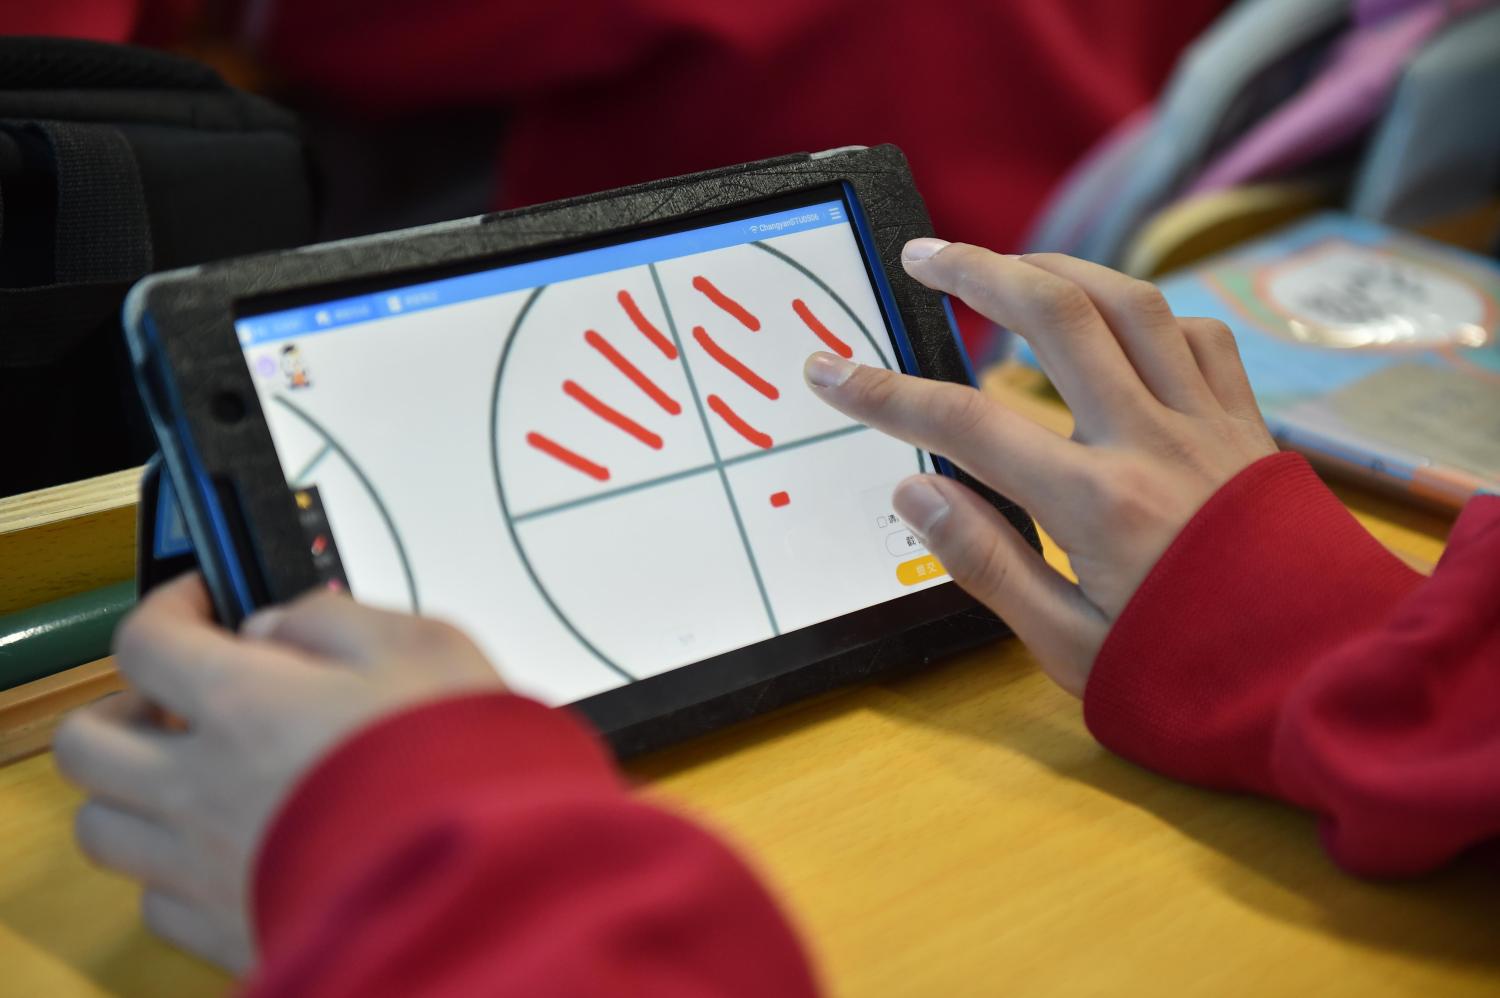 Students use tablet PCs as they have a lesson in the classroom at a primary school in Langfang city, south China's Hebei province, 24 April 2018.A primary school in Langfang city of Hebei province has introduced tablet PCs into class to facilitate the mathematics teaching. Every student is equipped with a tablet computer in class. The primary school is the first piloted school for smart class in the city. Currently, electronic devices have been applied to seven schools.No Use China. No Use France.